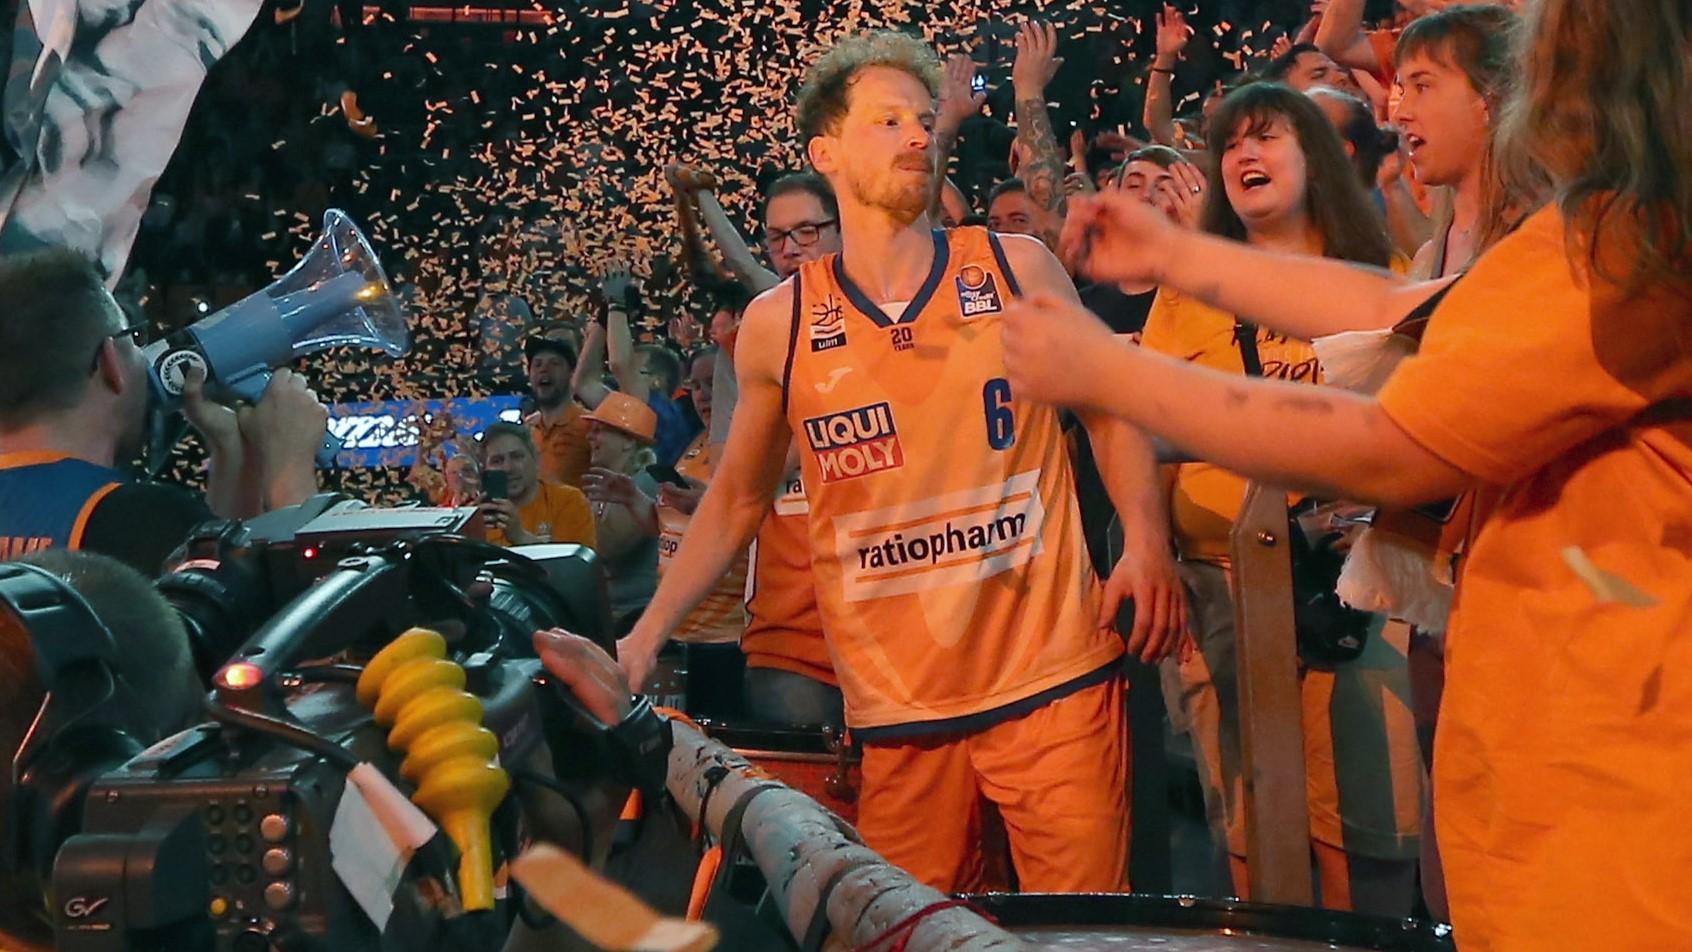 There was not much drama in the German playoffs as all four quarter-finals series were decided by sweeps - the first time in the history of the best-of-five format. There were some tears shed though as Per Günther played his 500th - and final - game in the easyCredit BBL. German basketball also gained a back-to-back Turkish Airlines EuroLeague champion as Tibor Pleiss starred in the Championship Game as Anadolu Efes Istanbul won a second straight title.